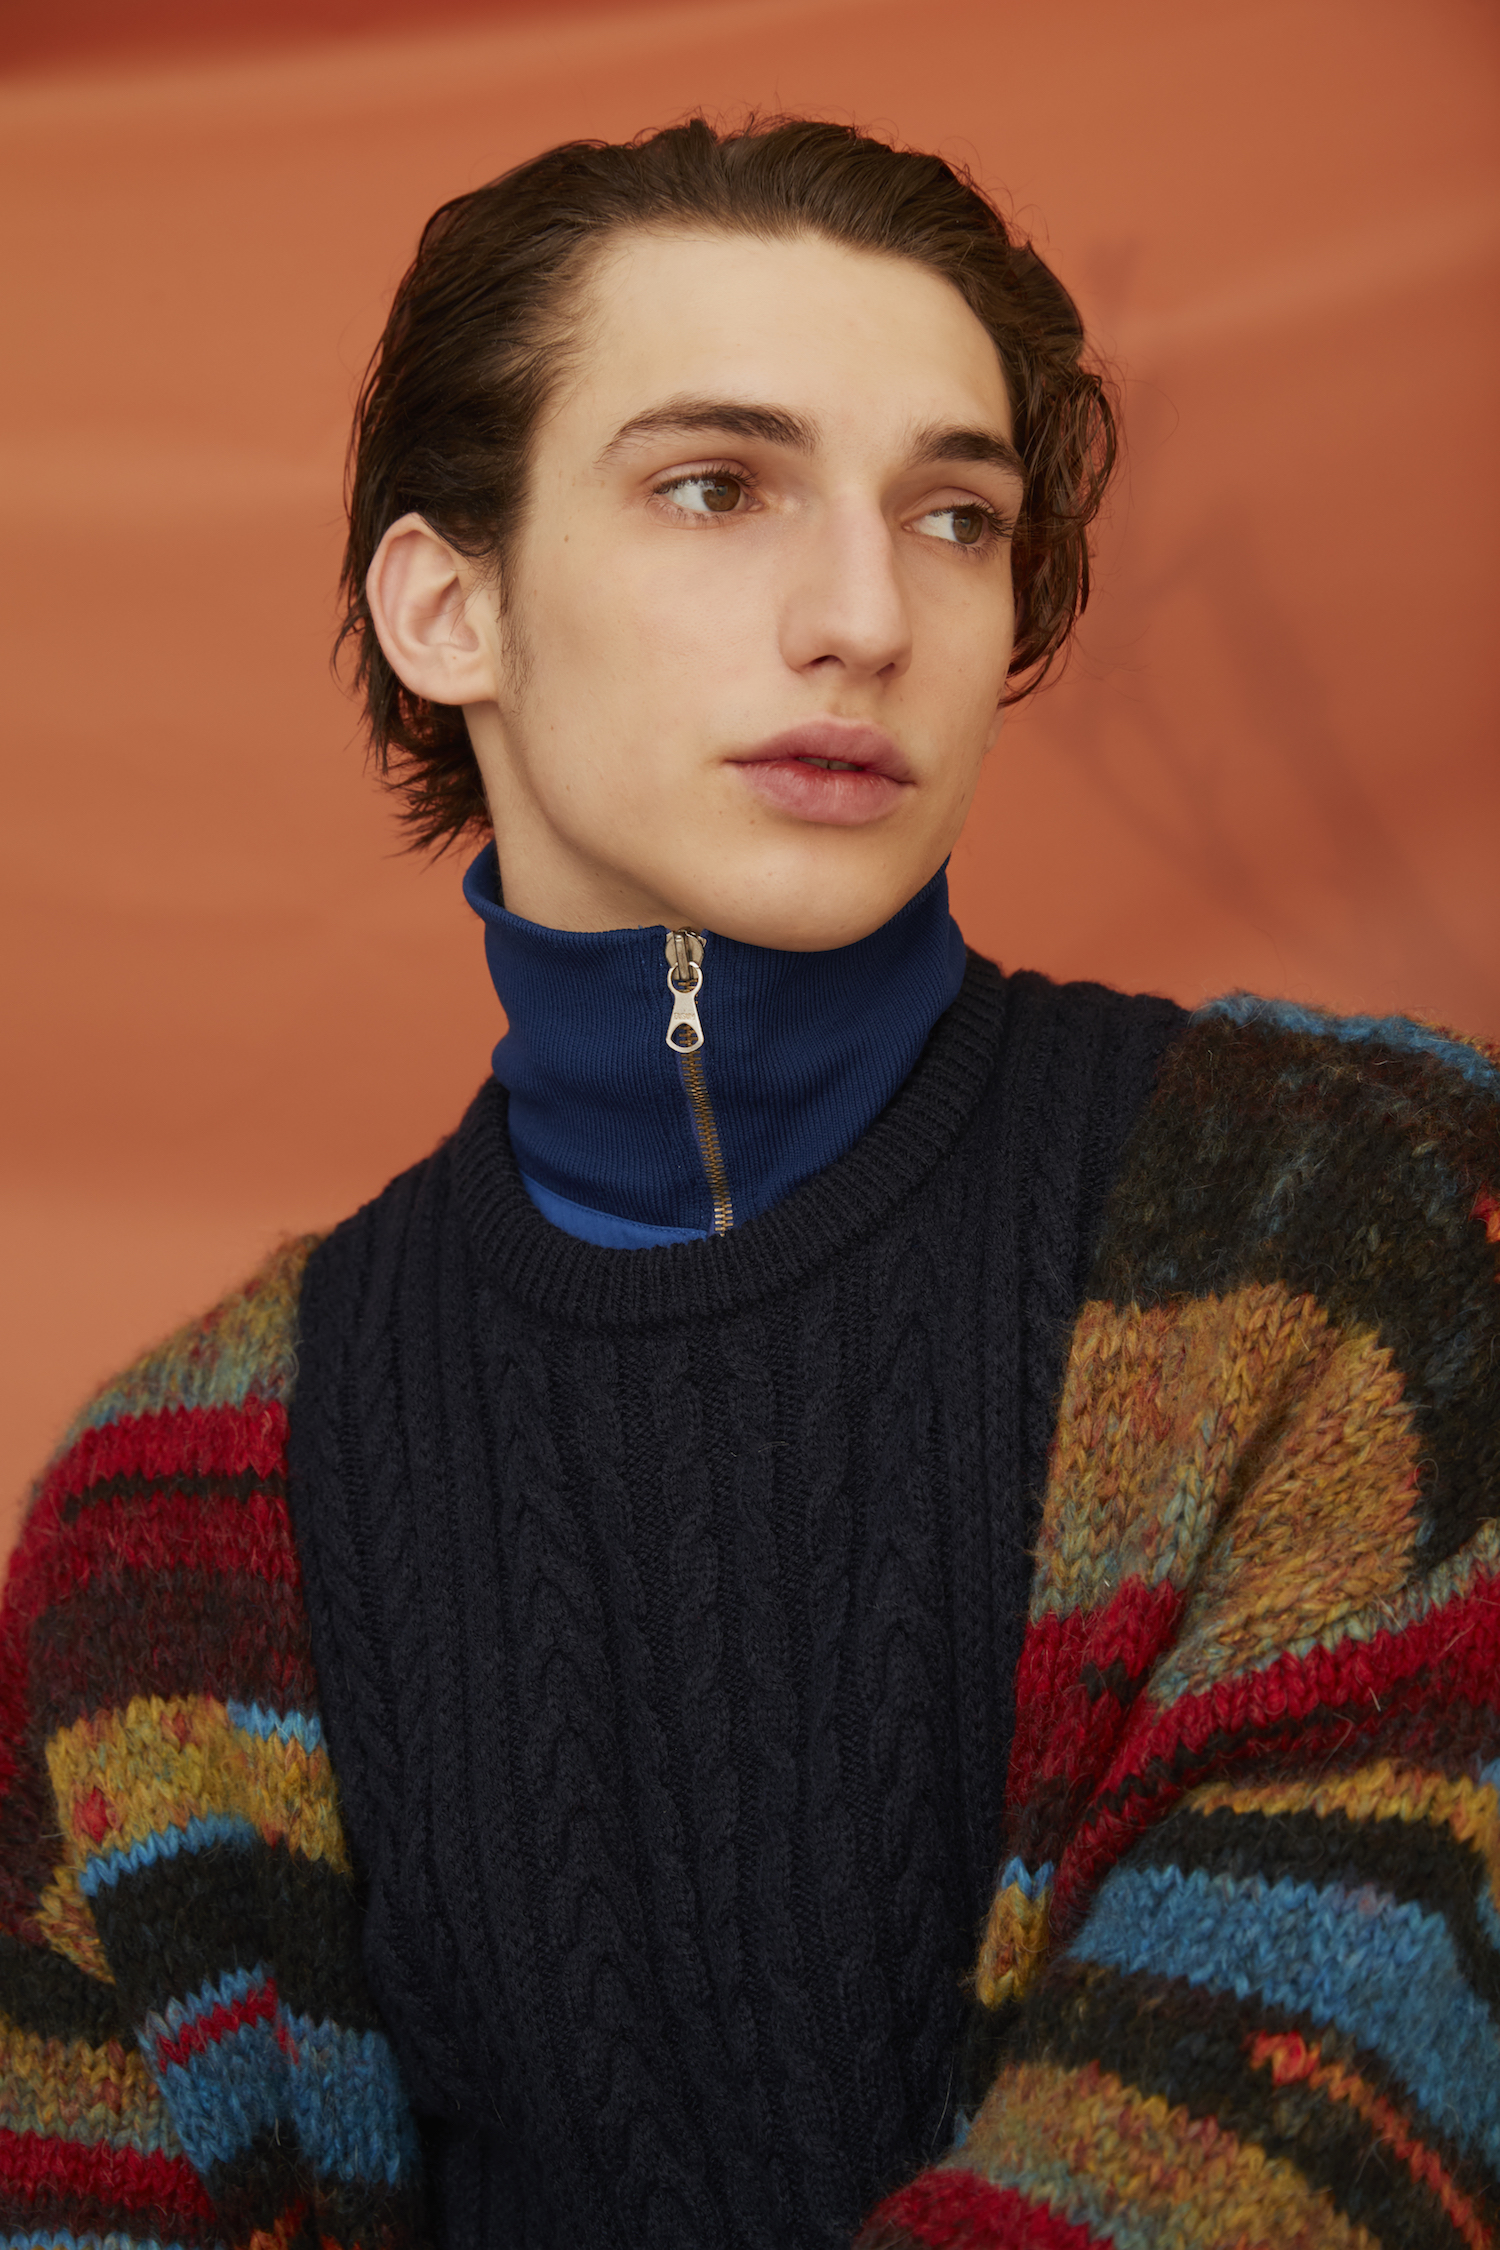 View Urban Outfitter’s AW18 Lookbook Here